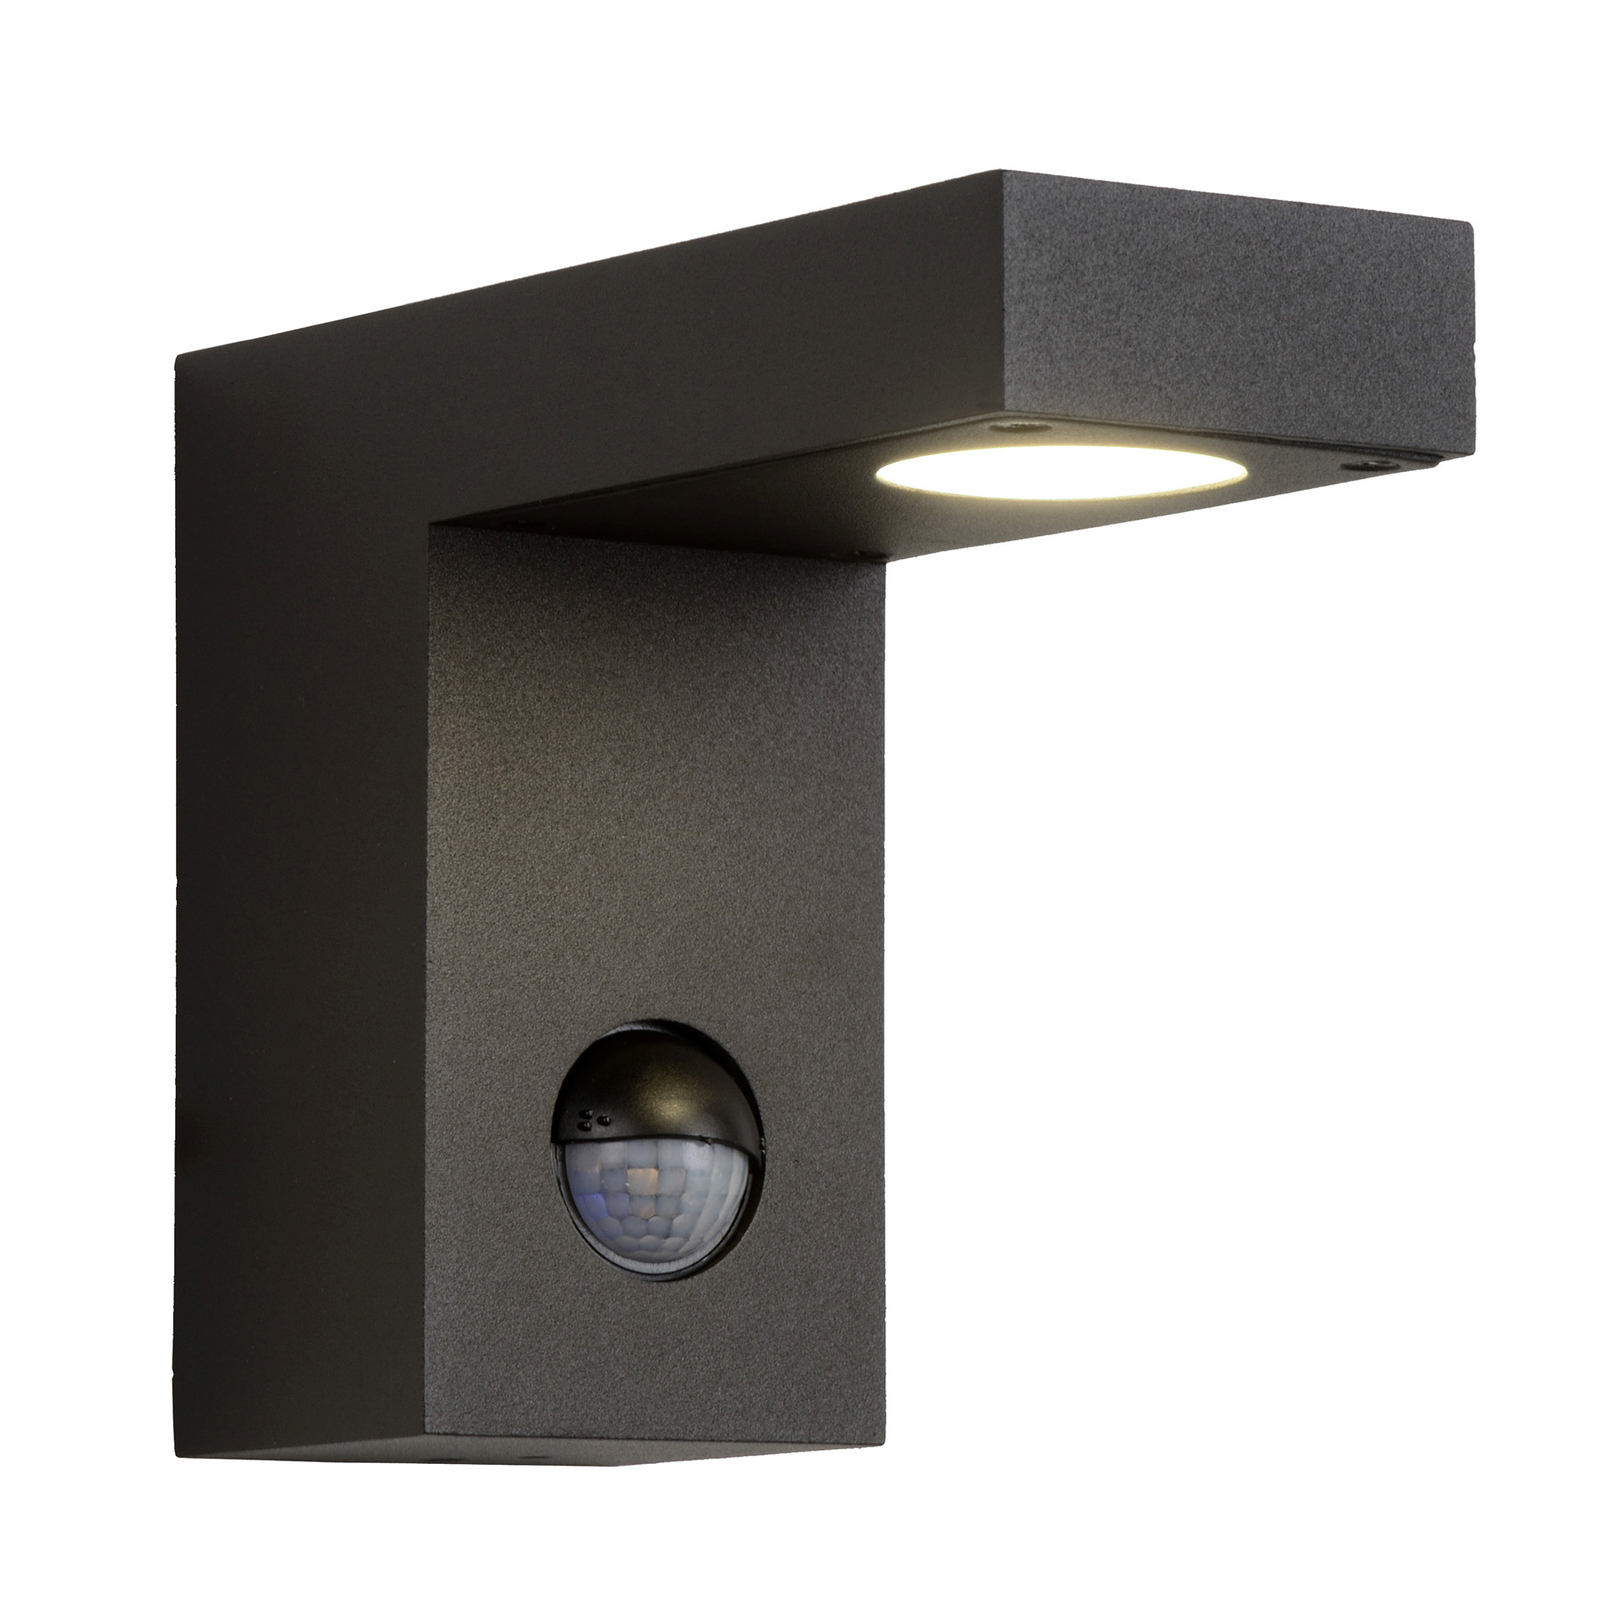 Texas LED outdoor wall light with a motion sensor